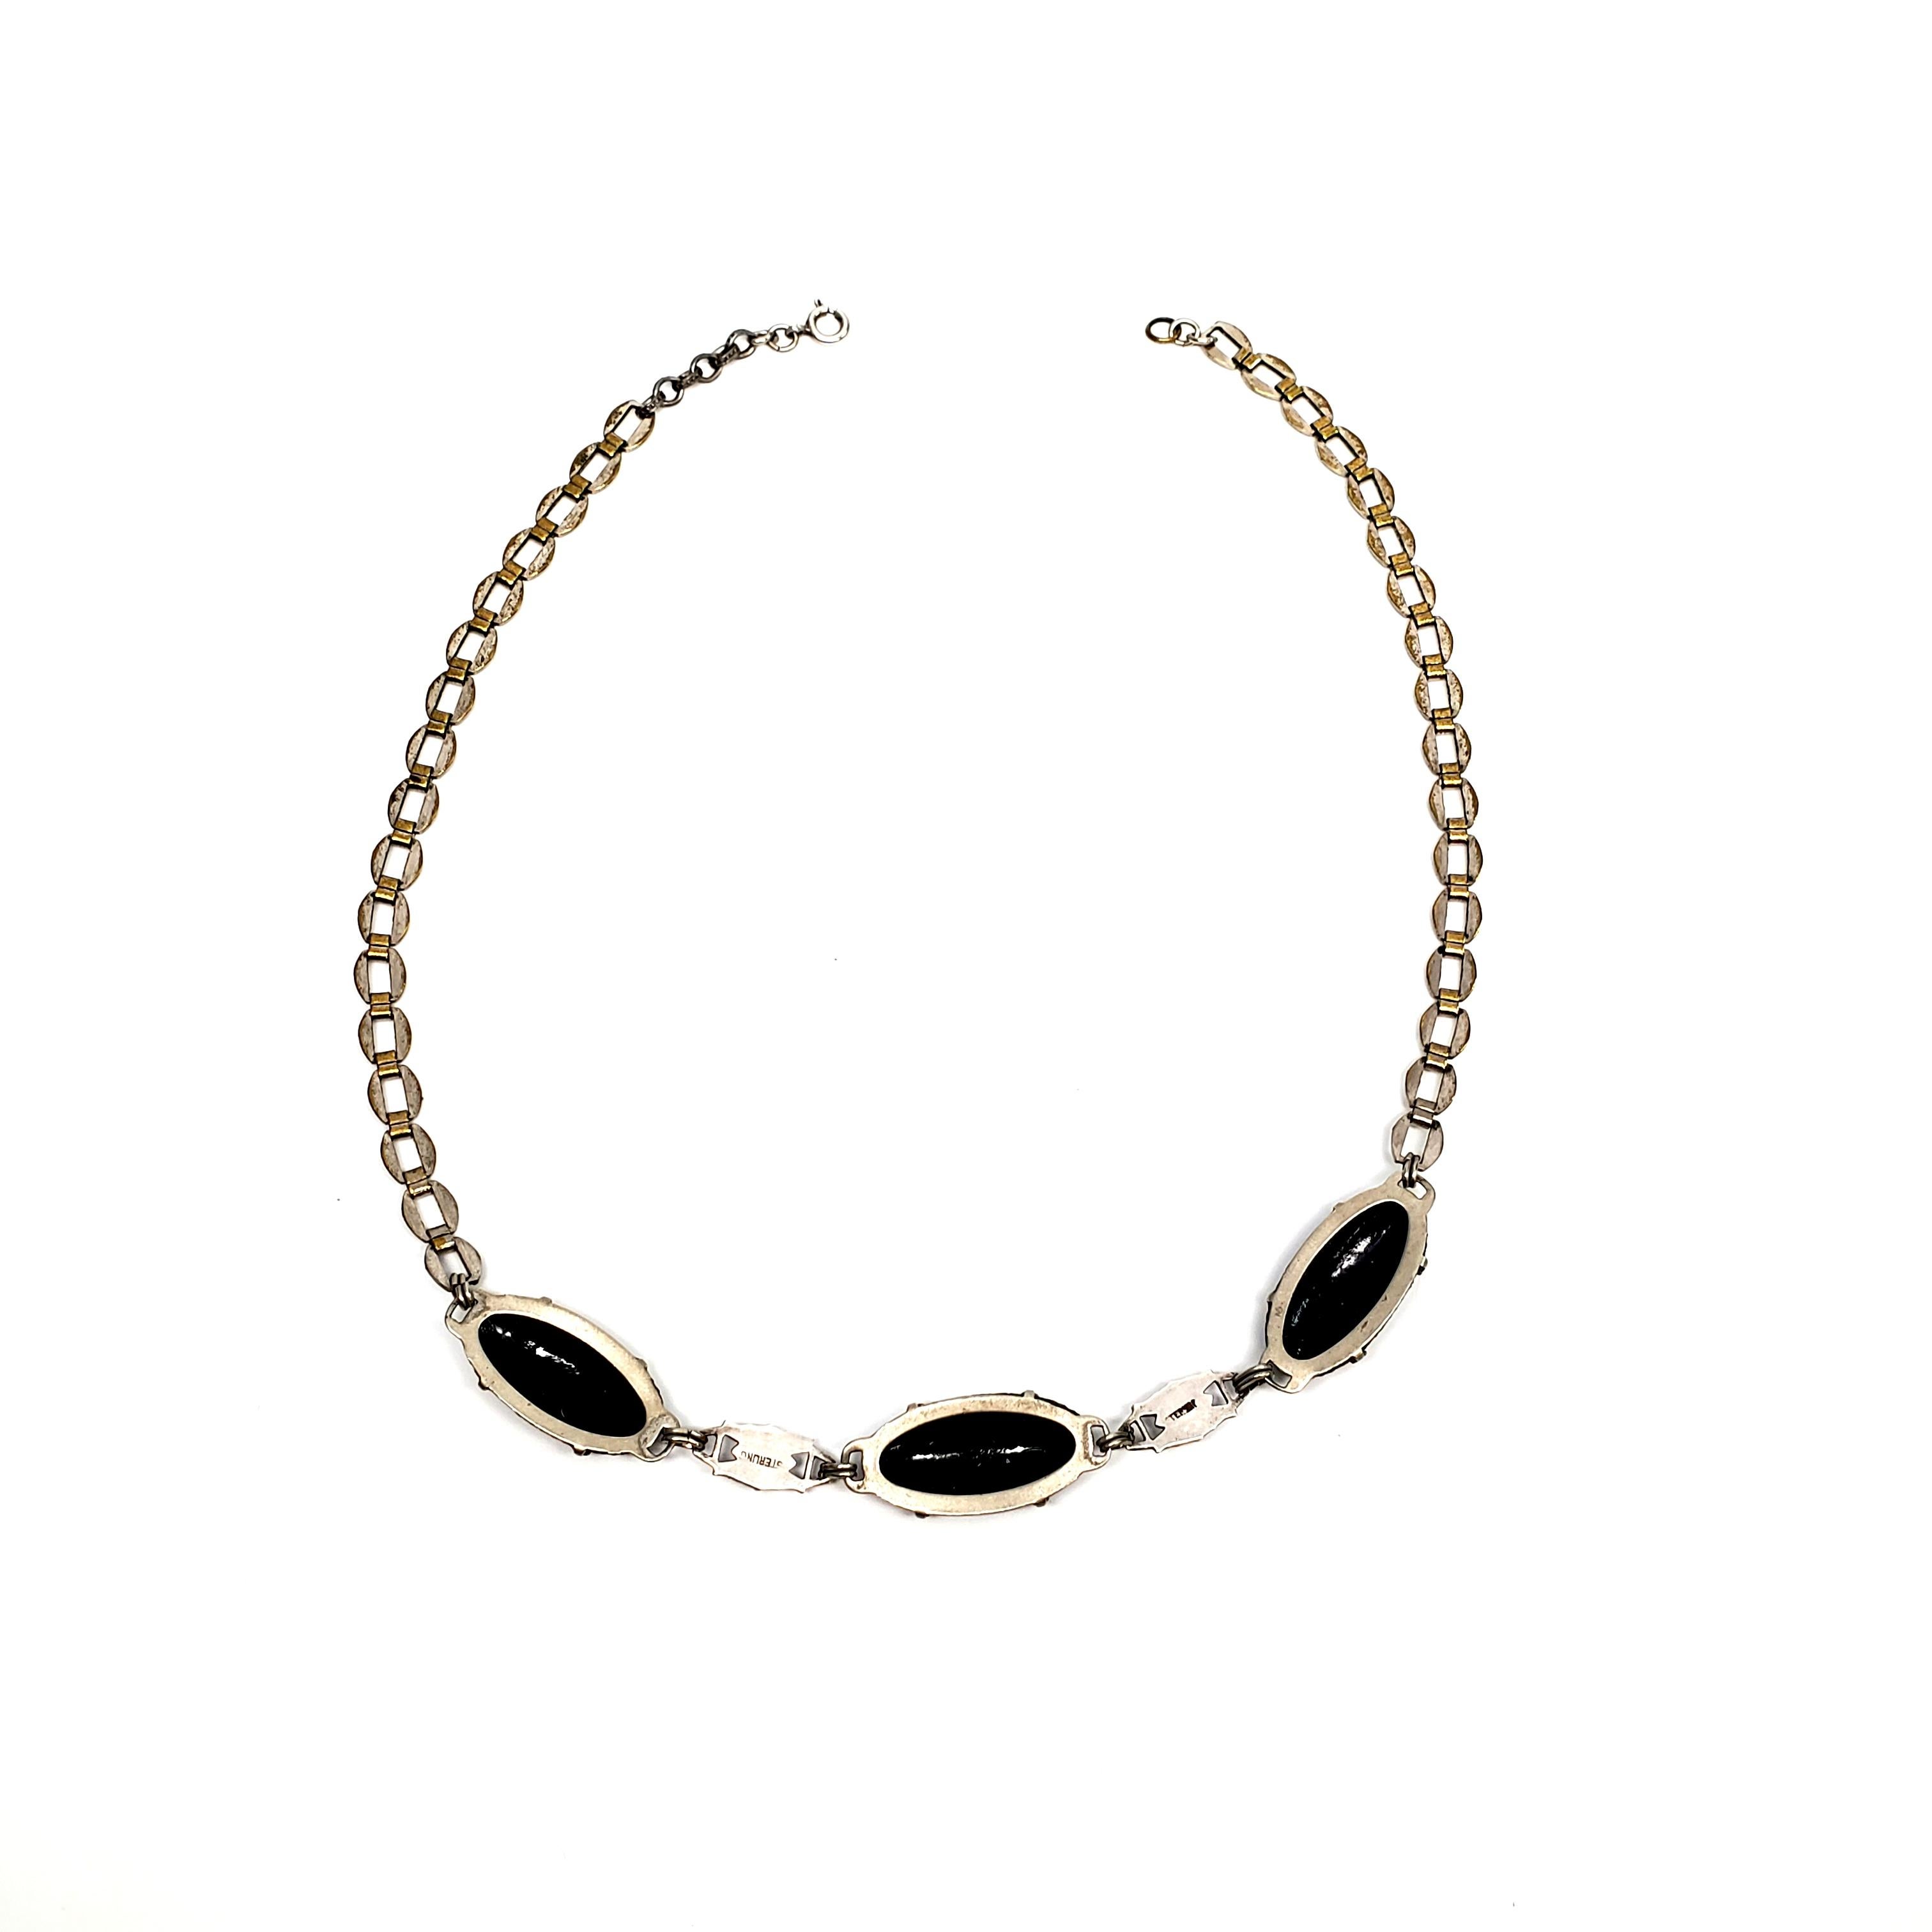 Antique Victorian sterling silver and gold accent carved french jet necklace.

The flat oval chain links are etched sterling silver with with gold accents. Three oval carved black jet beads with flat marcasite accented links.

Measures approx 16